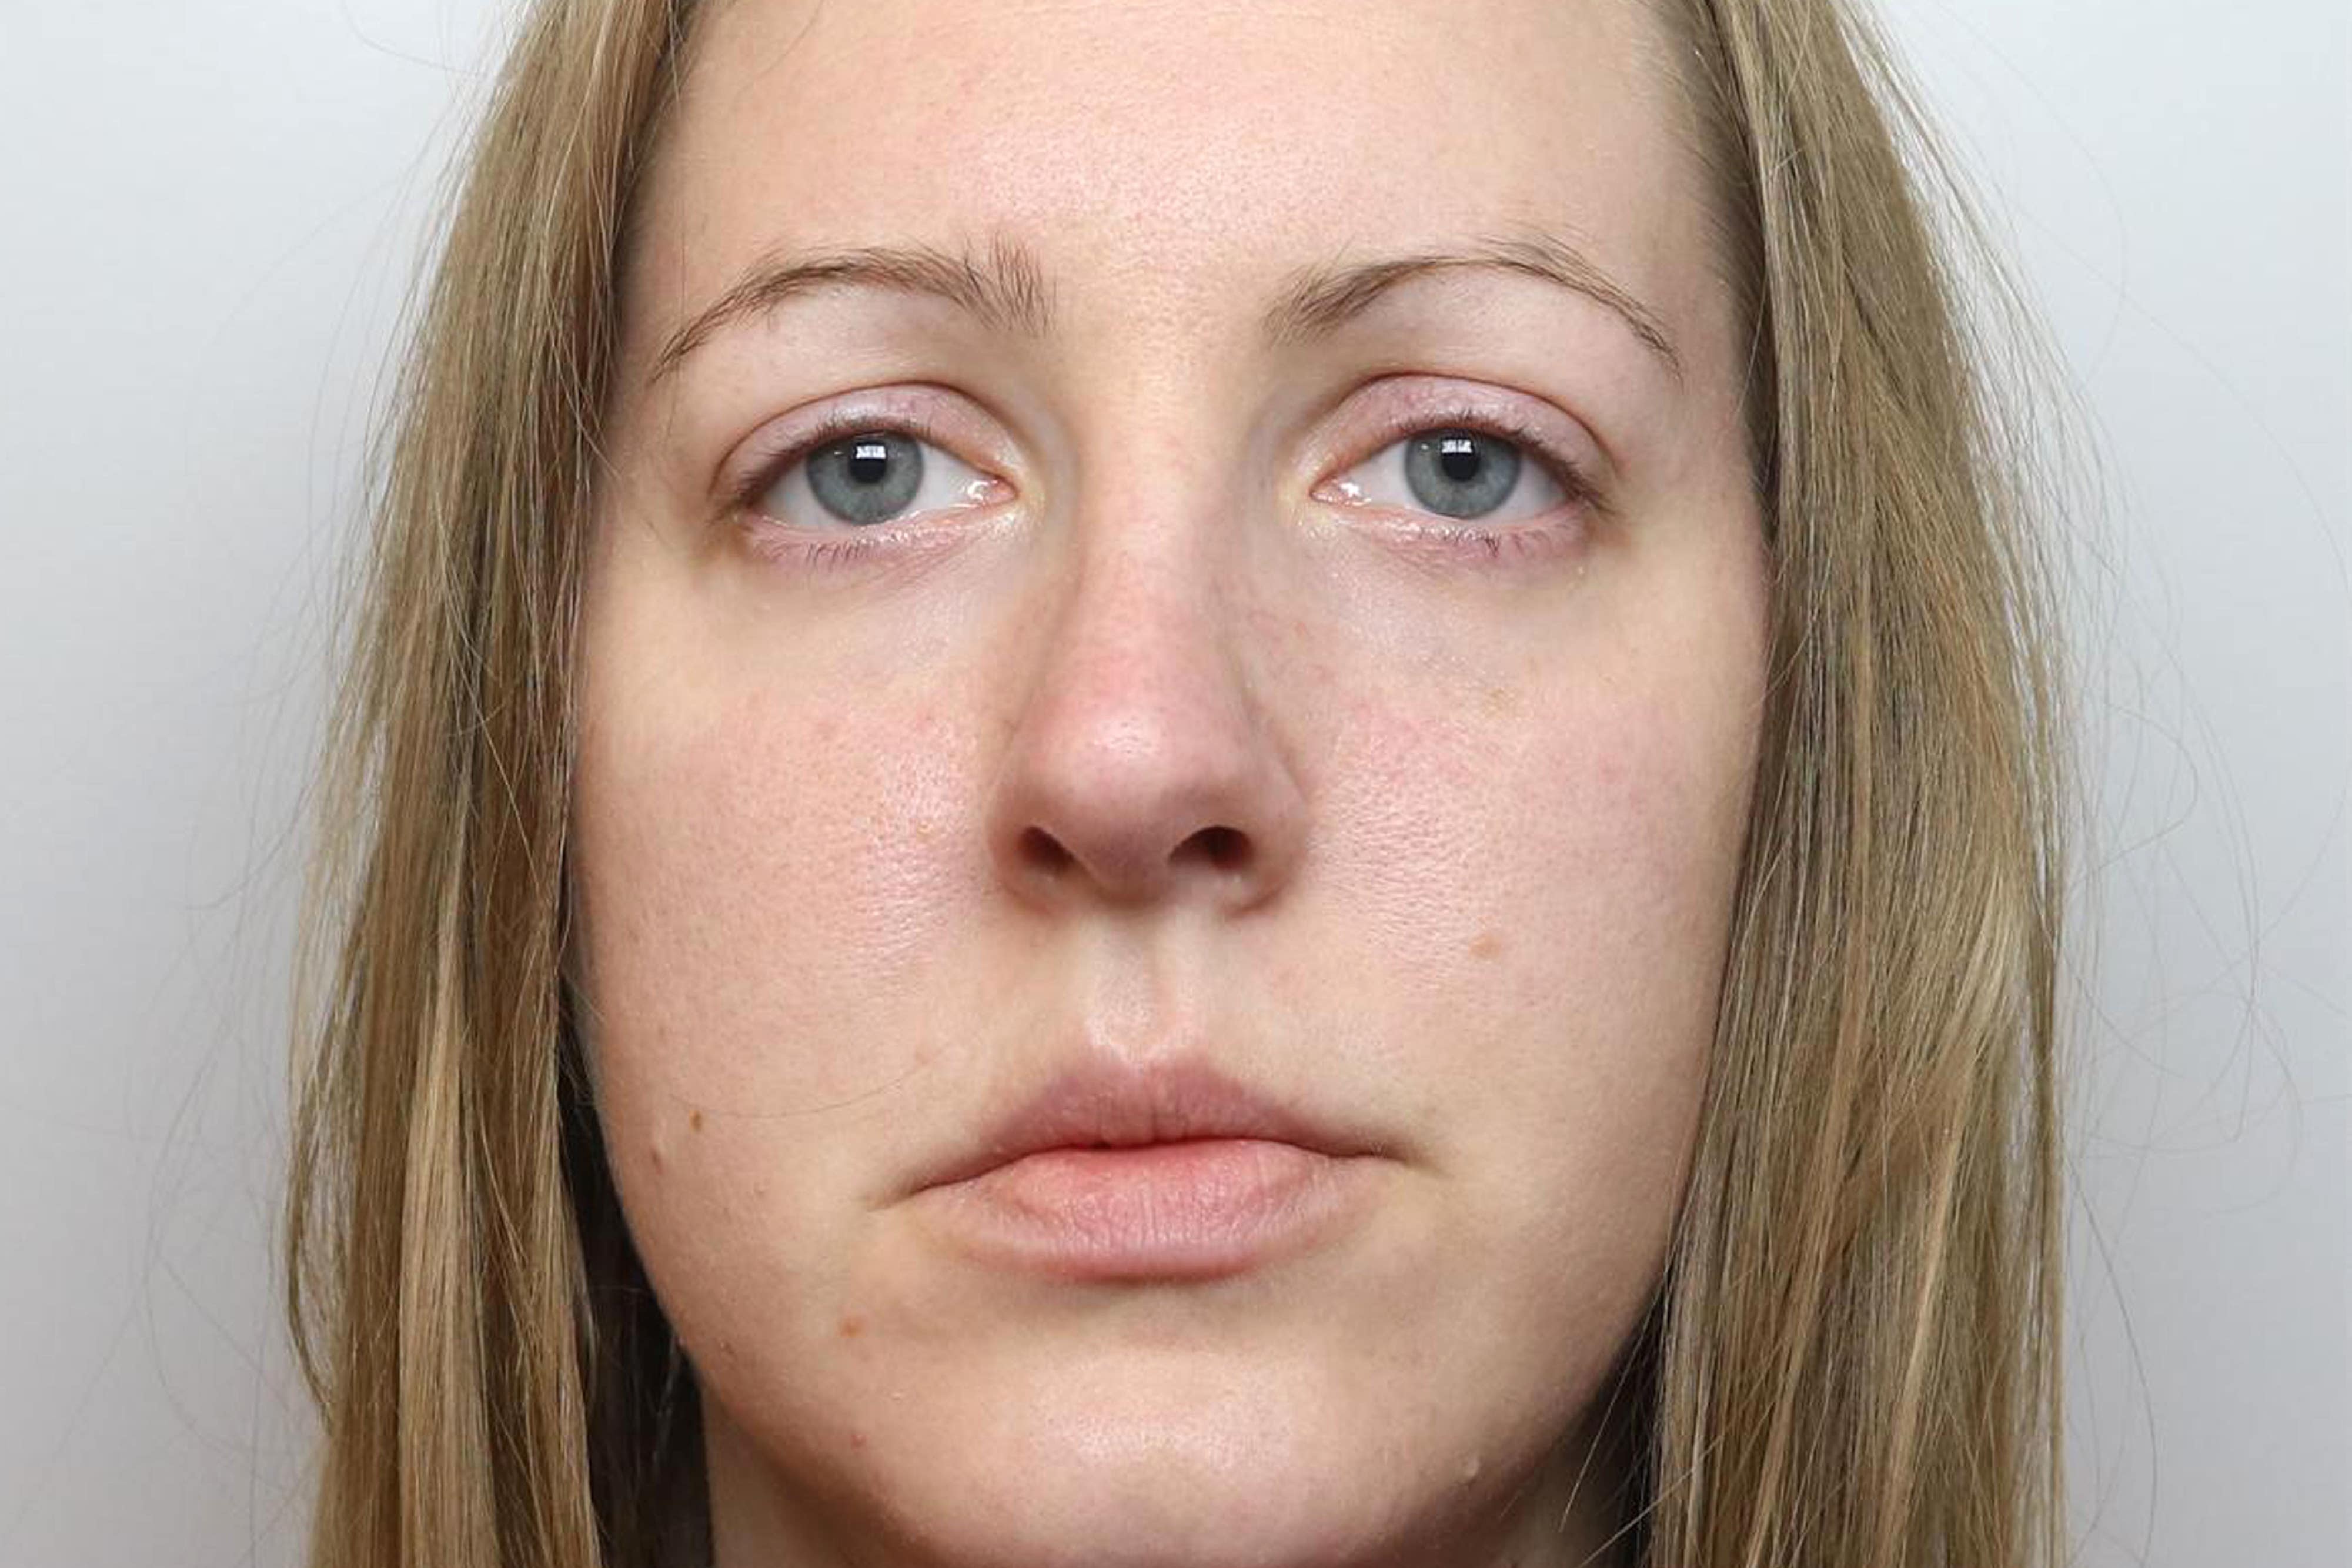 Serial killer nurse Lucy Letby has been handed a rare whole-life order, after being found guilty of murdering seven babies and attempting to kill six others at the neonatal unit where she worked